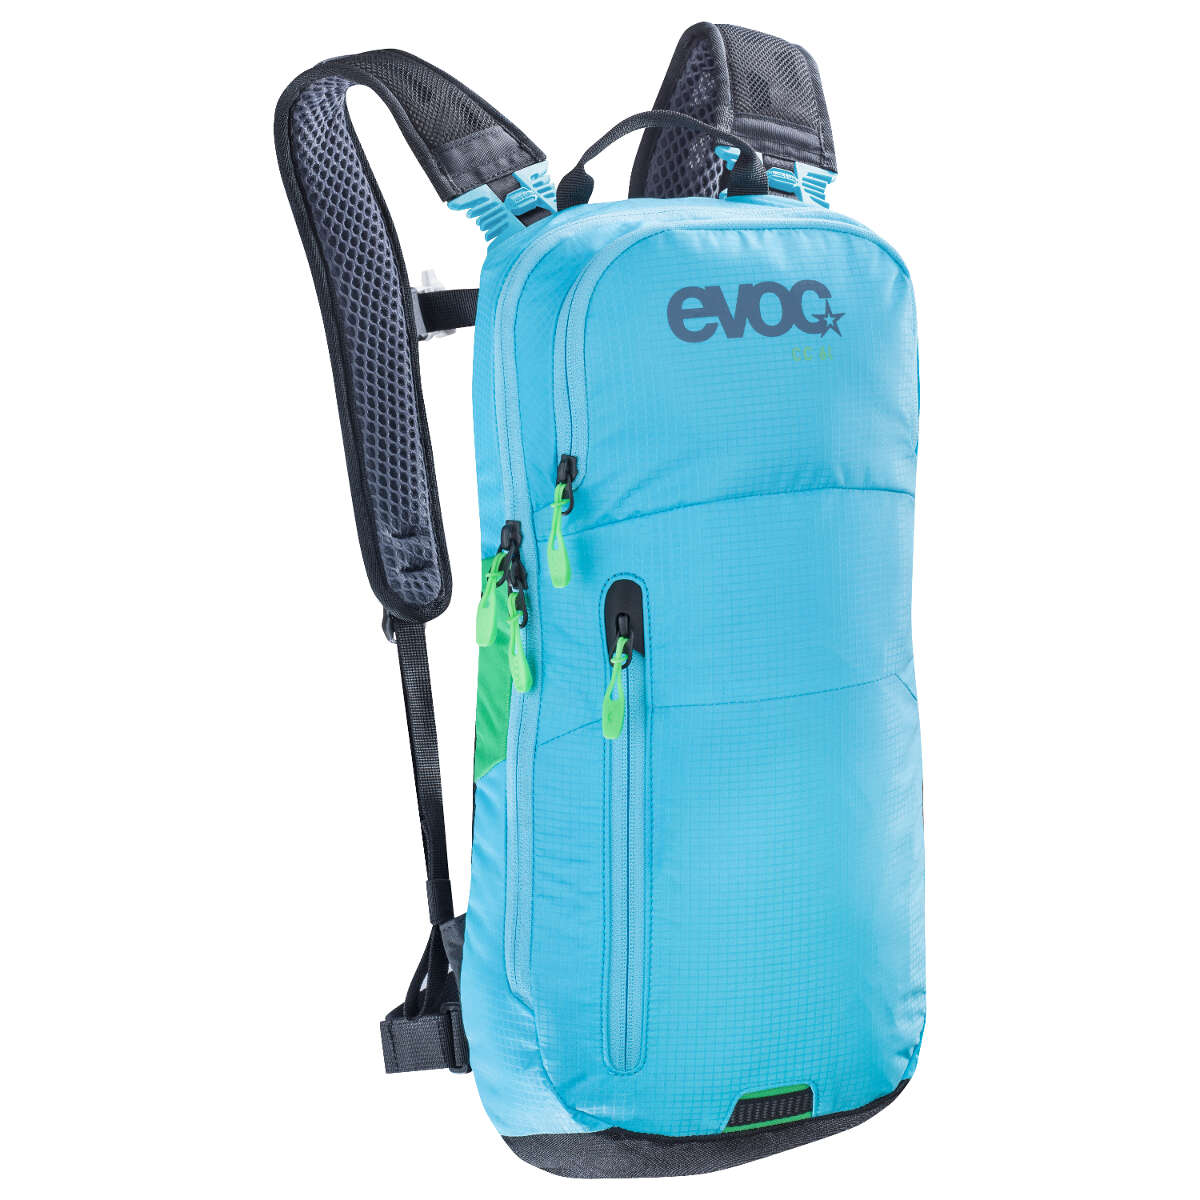 Evoc Backpack with Hydration System Compartment Cross Country Neon Blue, 6 Liter